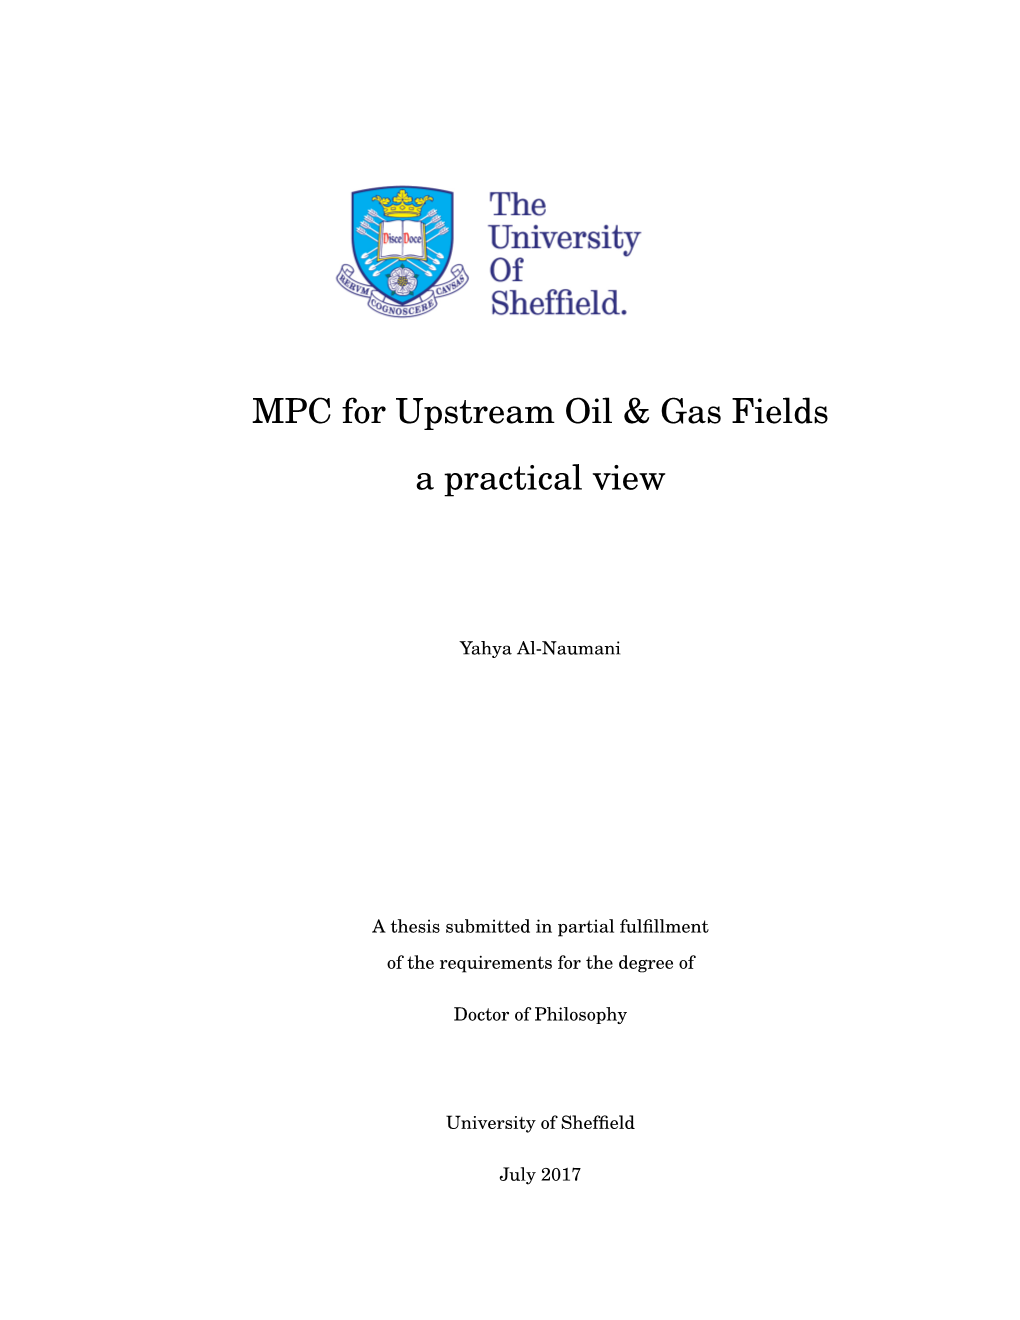 MPC for Upstream Oil & Gas Fields a Practical View